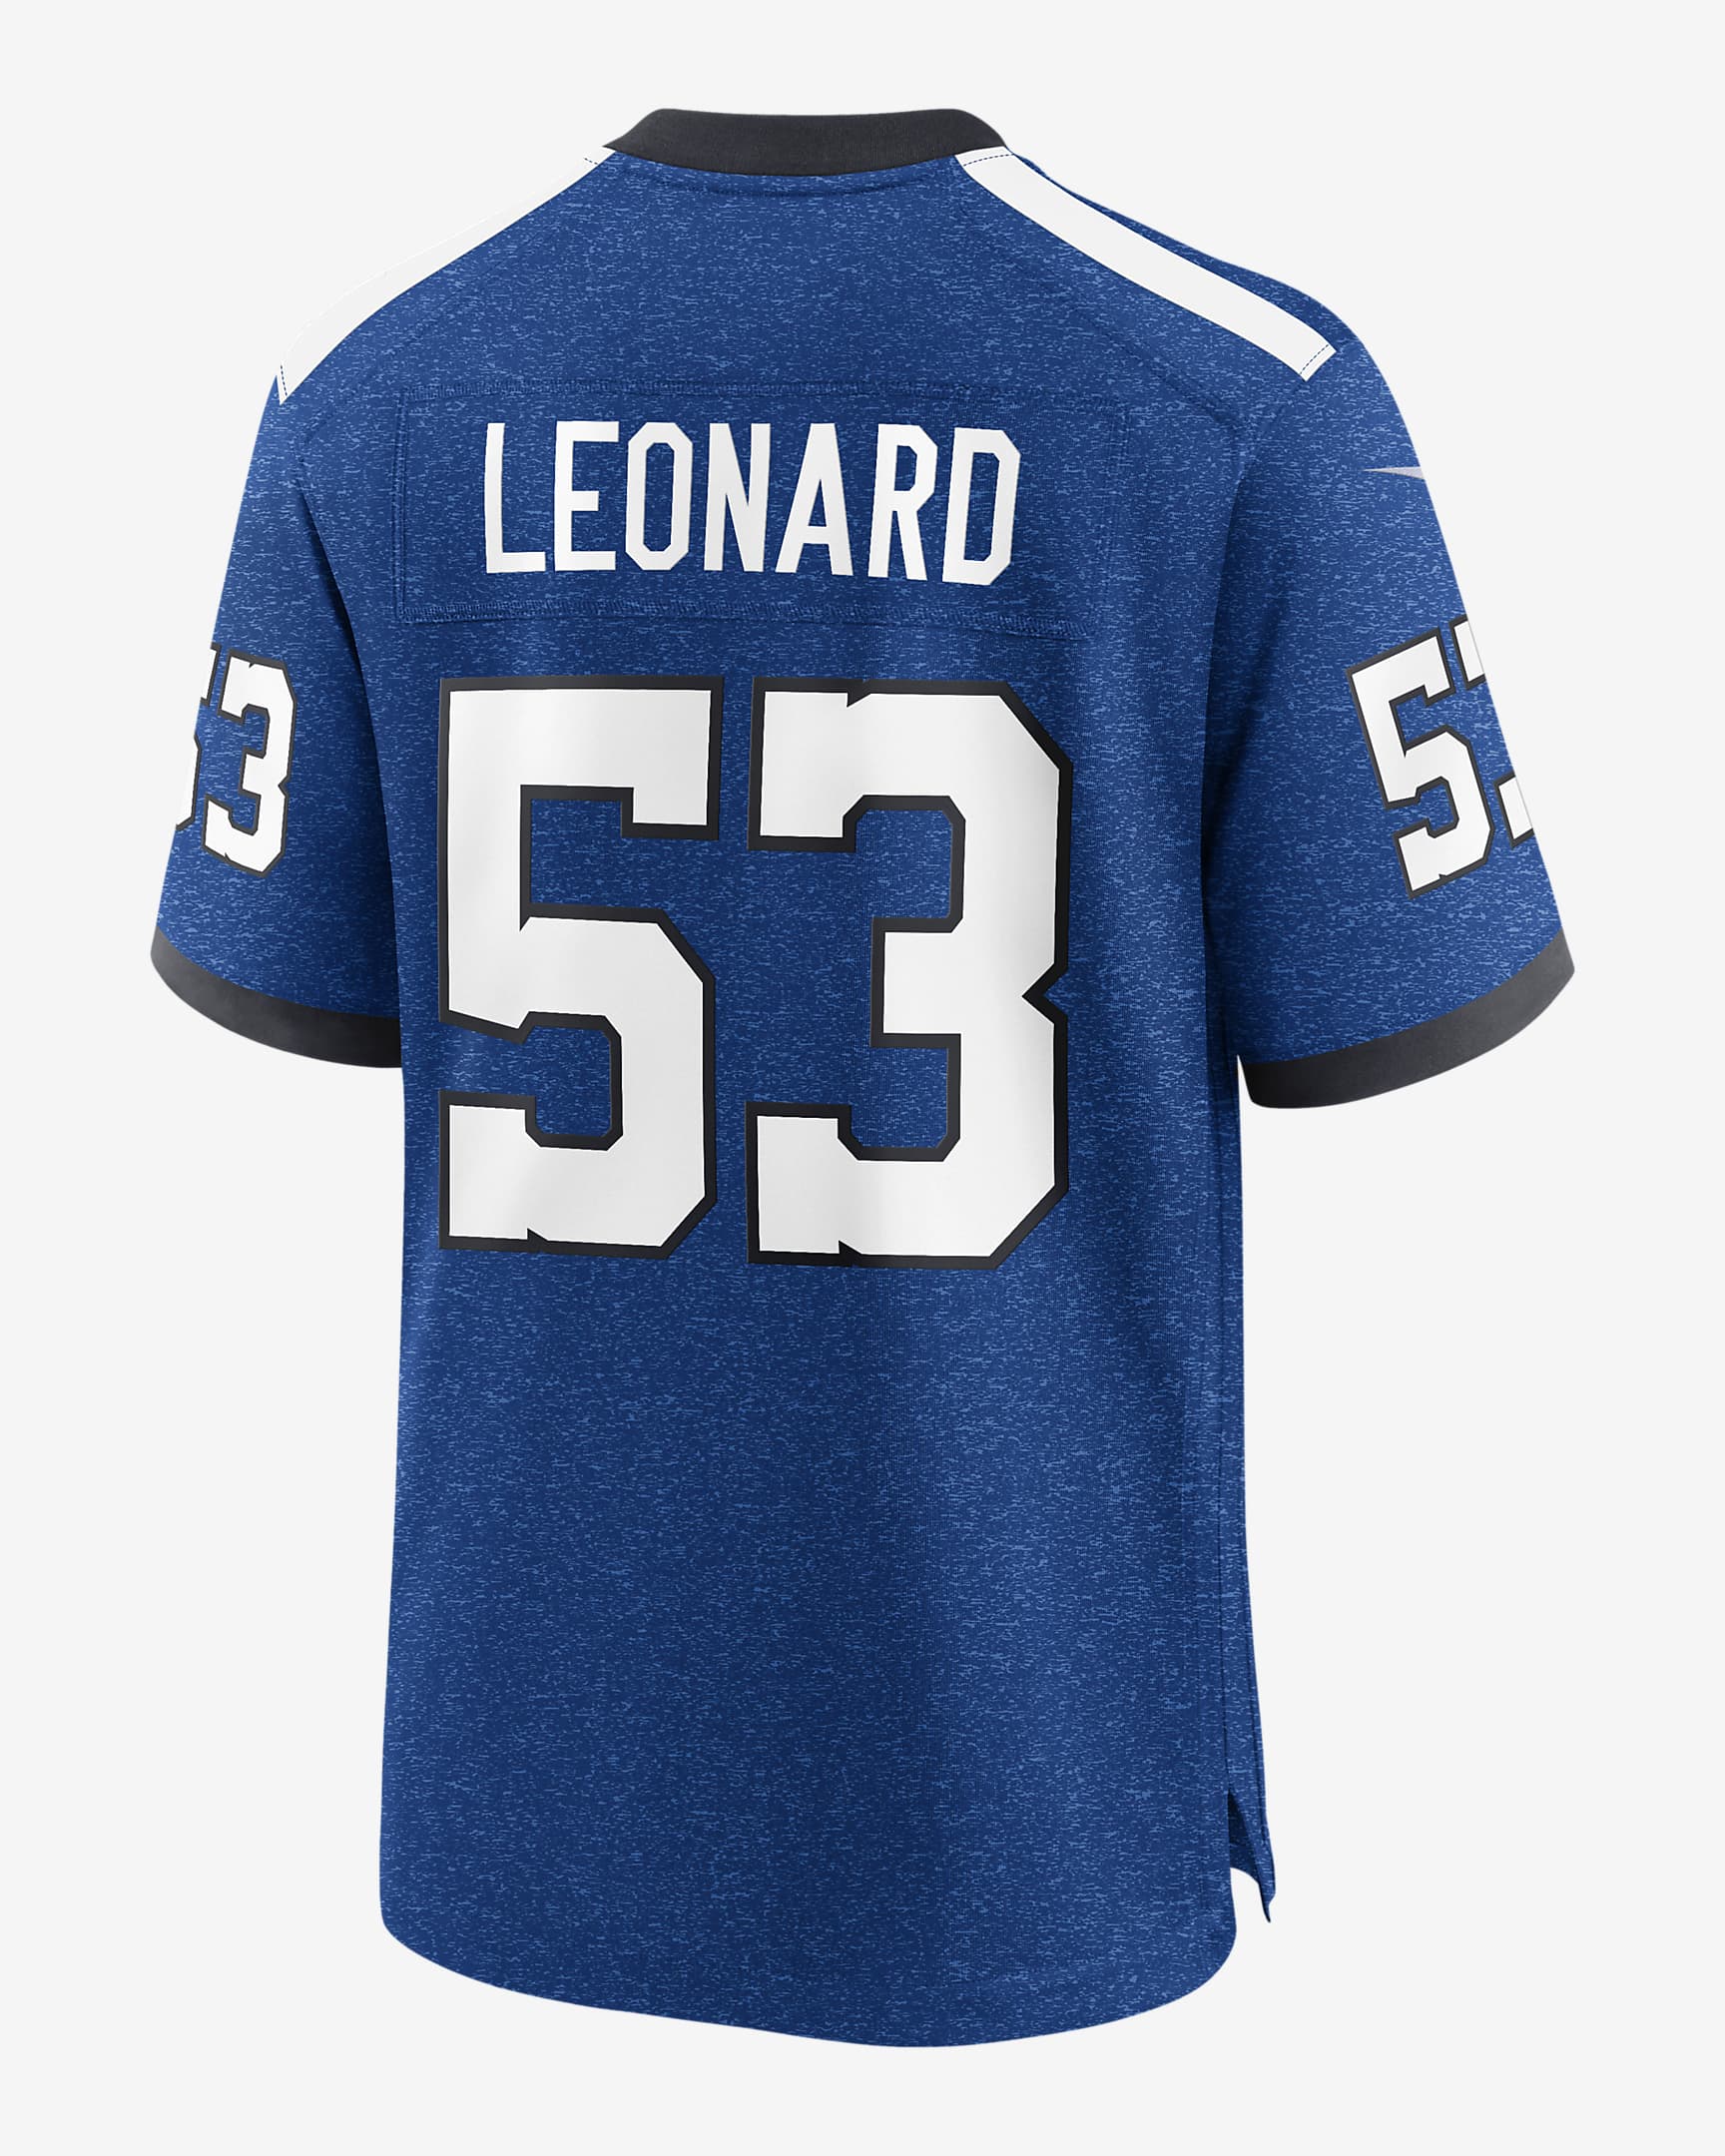 Shaquille Leonard Indianapolis Colts Men's Nike NFL Game Football ...